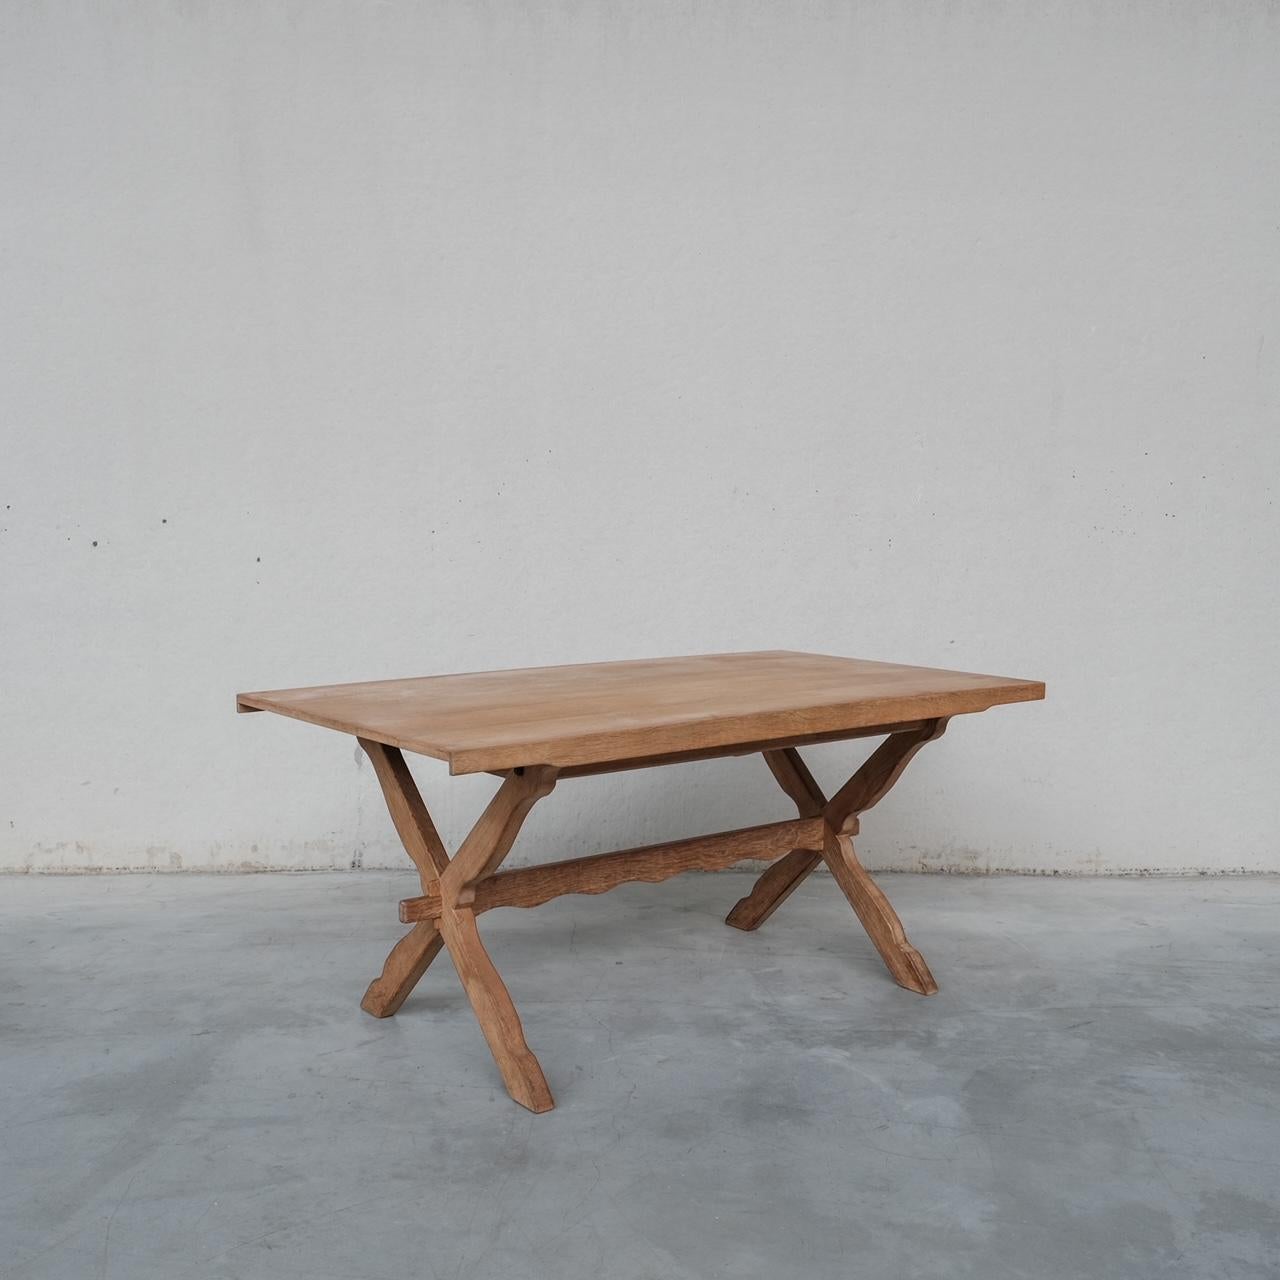 An x-frame dining table attributed to Henning Kjaernulf. 

Denmark, c1960s. 

Pleasing details such as the wobbly carved stretcher. 

Good vintage condition, some scuffs and wear commensurate with age. 

Internal Ref: 07/03/24/001.

Location: